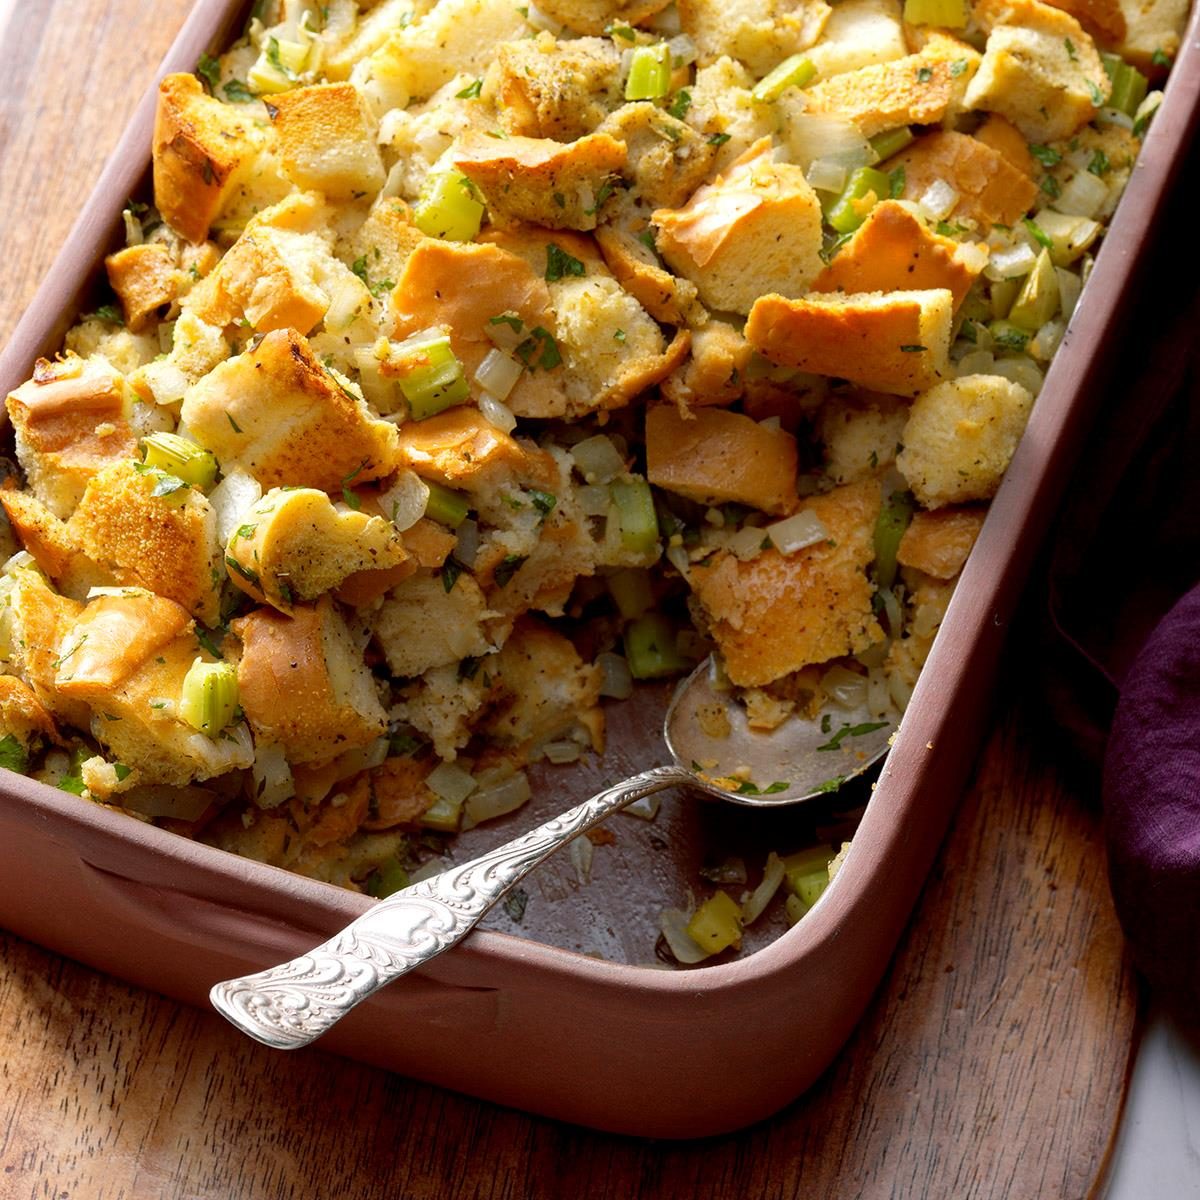 Oyster Stuffing Recipe: How to Make It